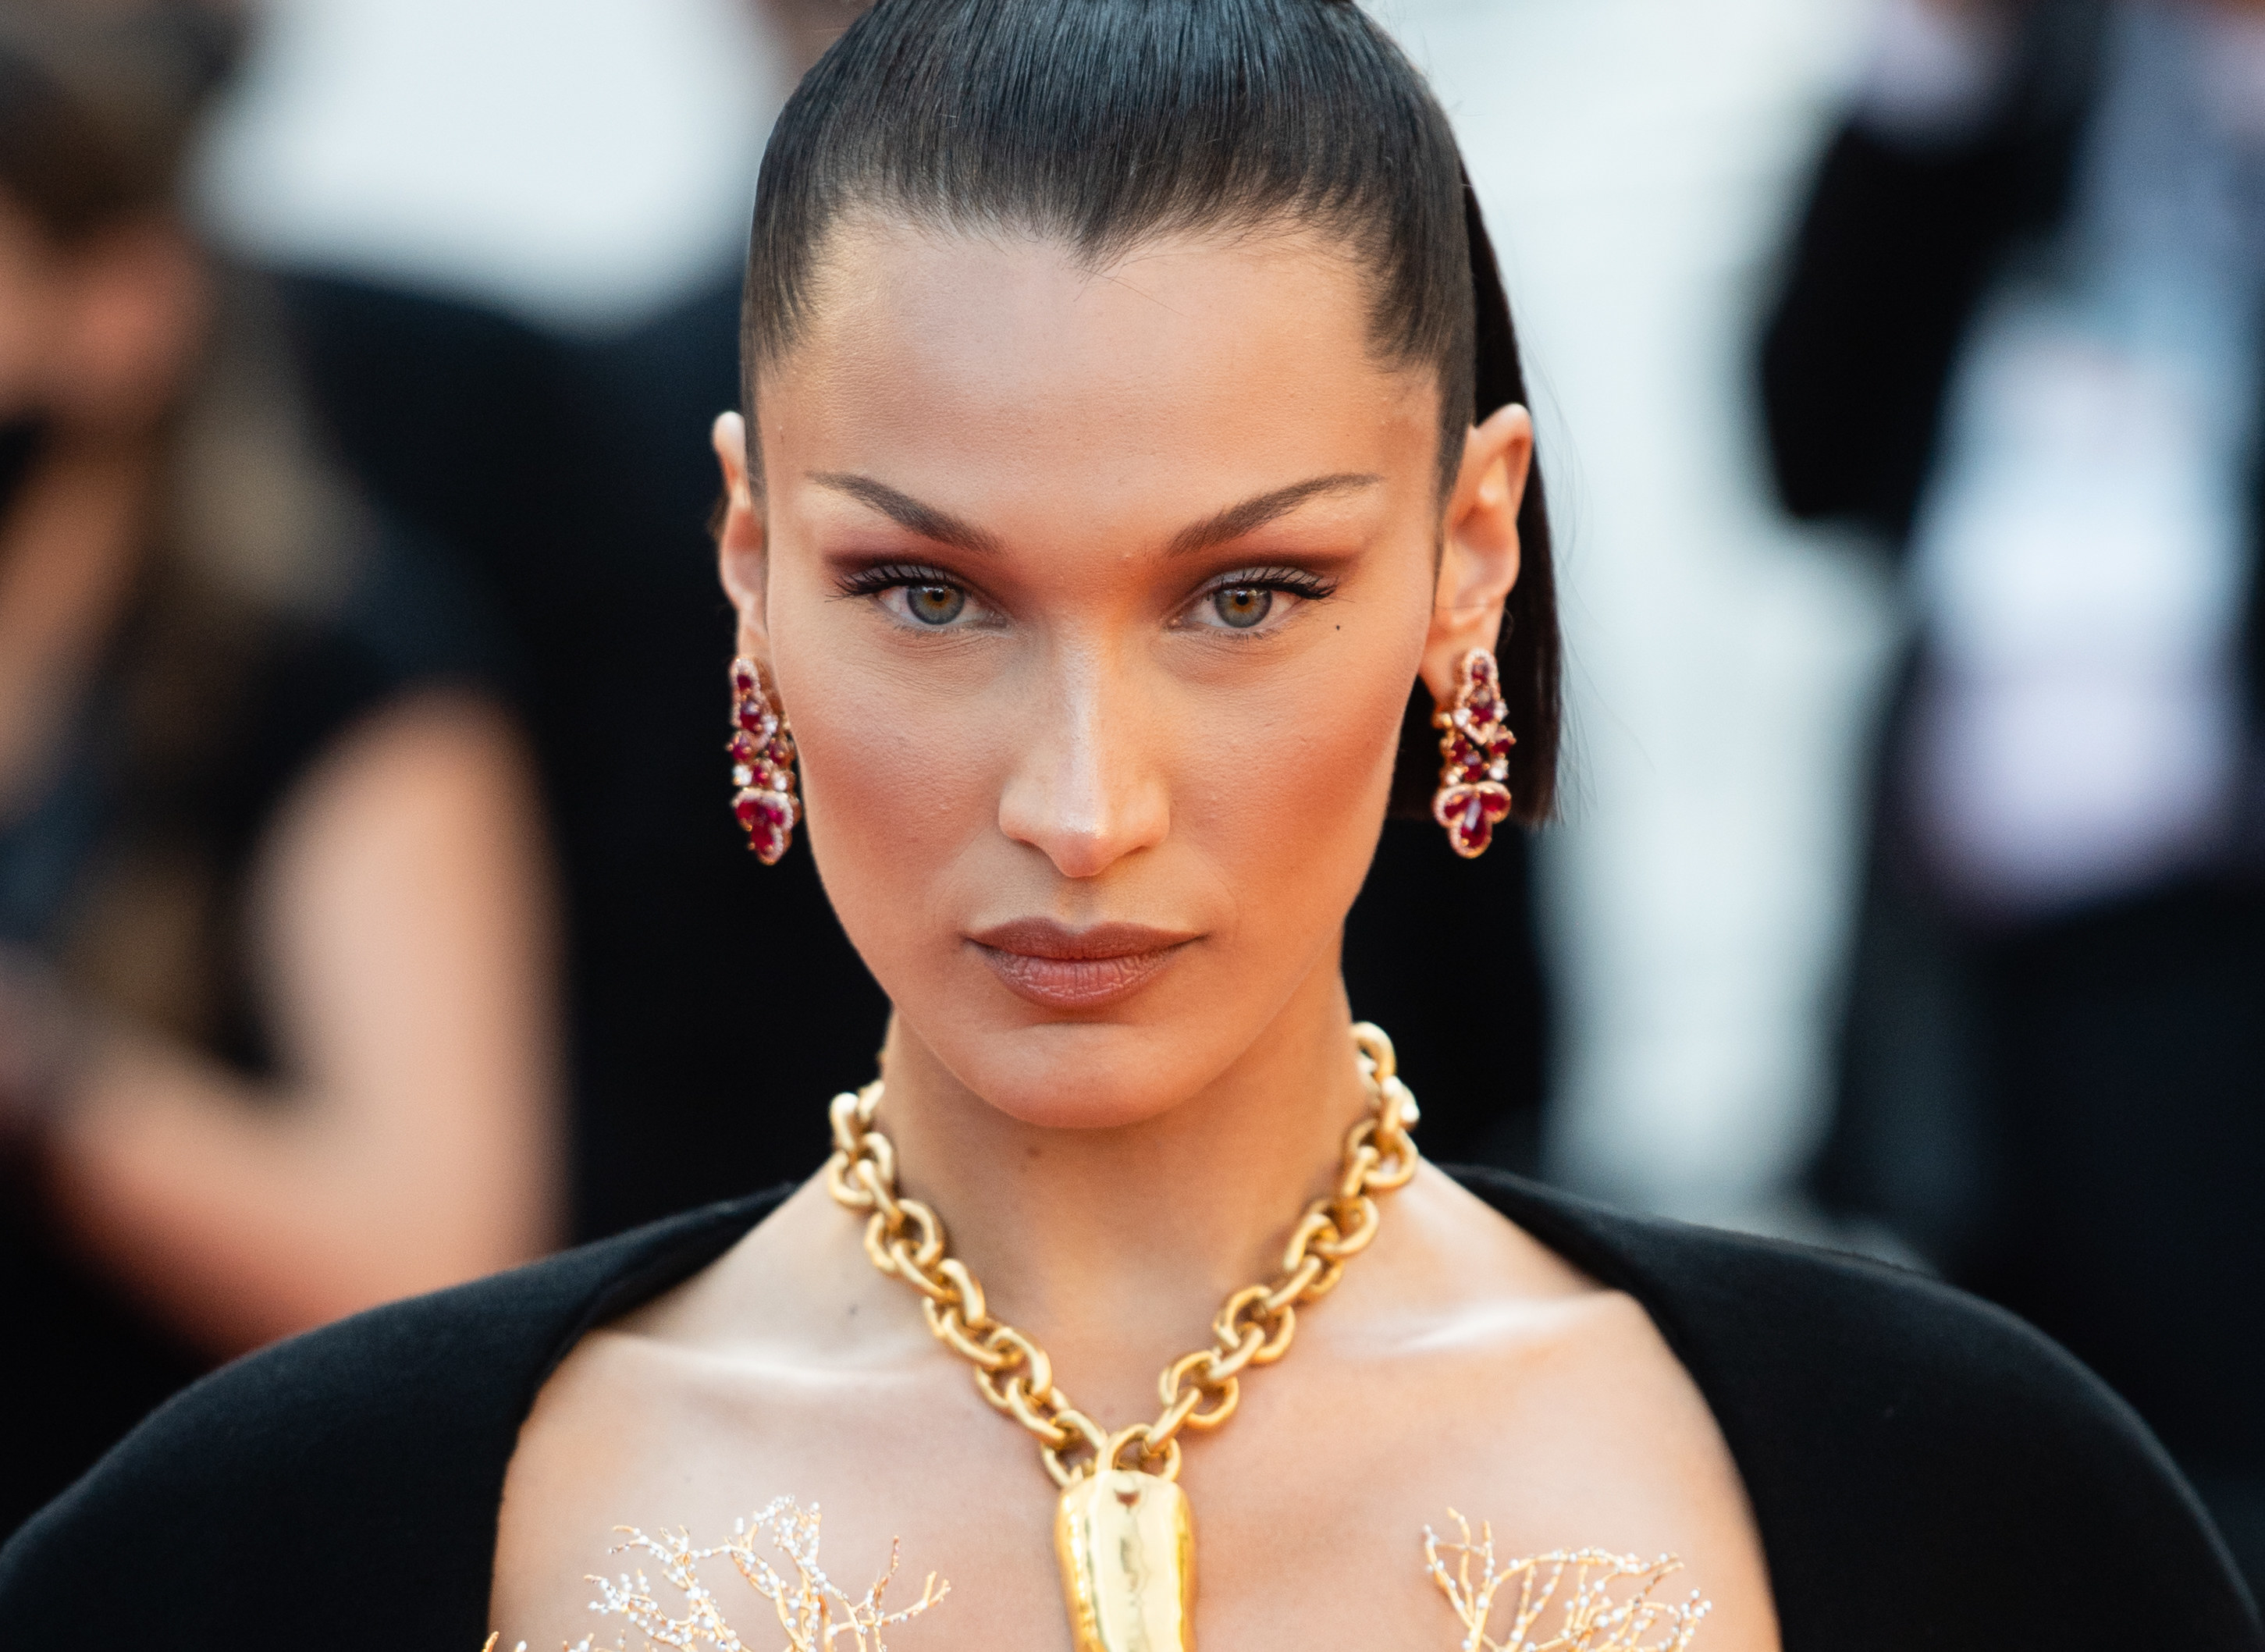 A close-up of Bella Hadid wearing ruby earrings and a gold necklace